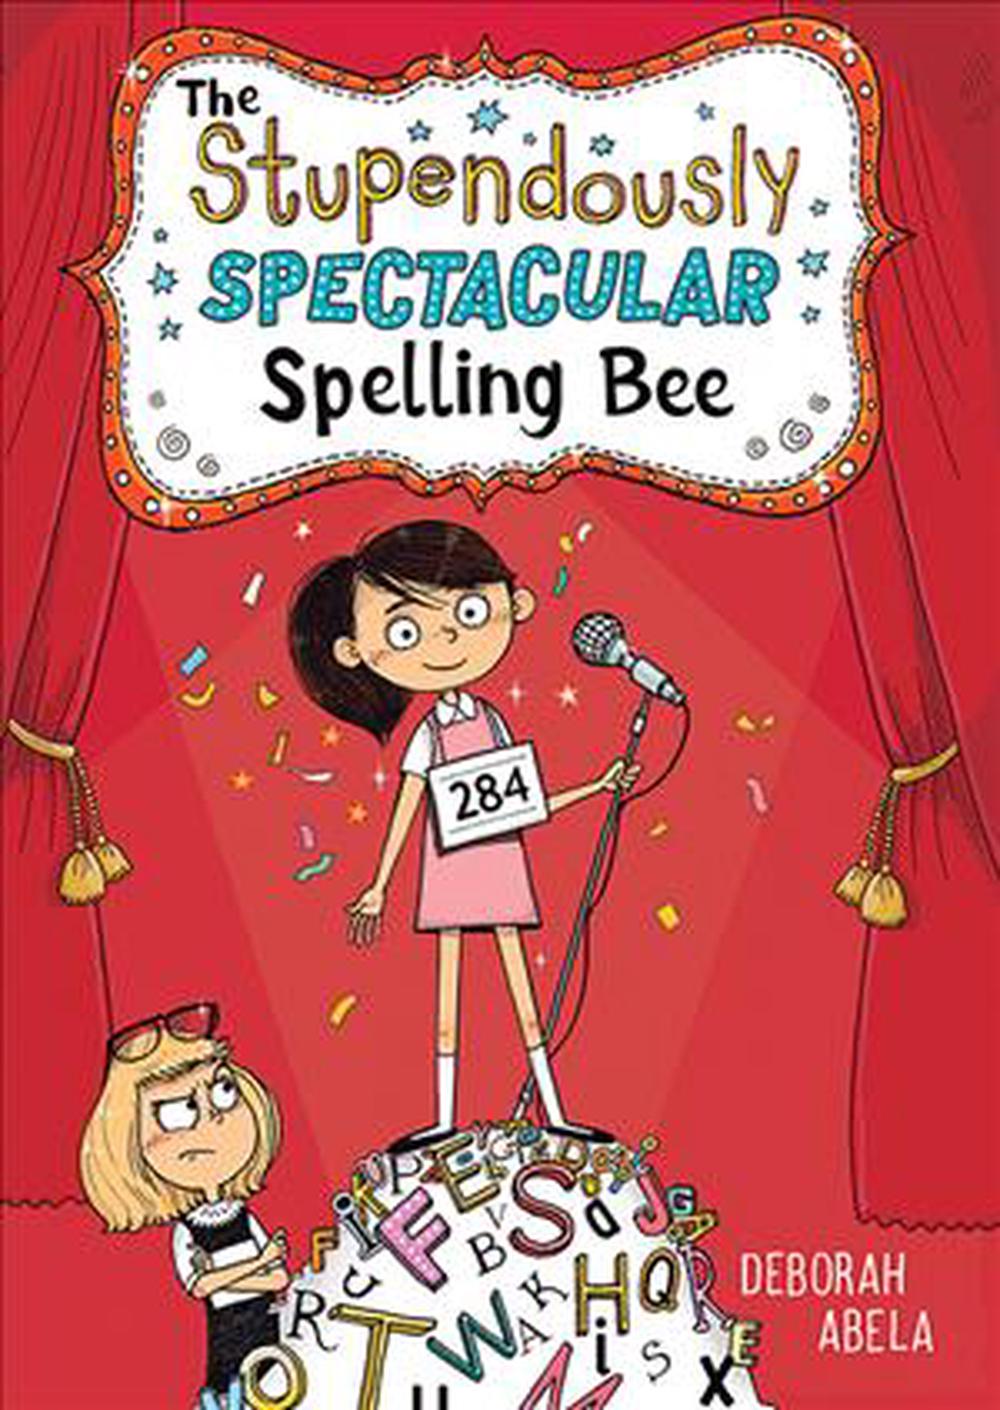 The Stupendously Spectacular Spelling Bee by Deborah Abela (English